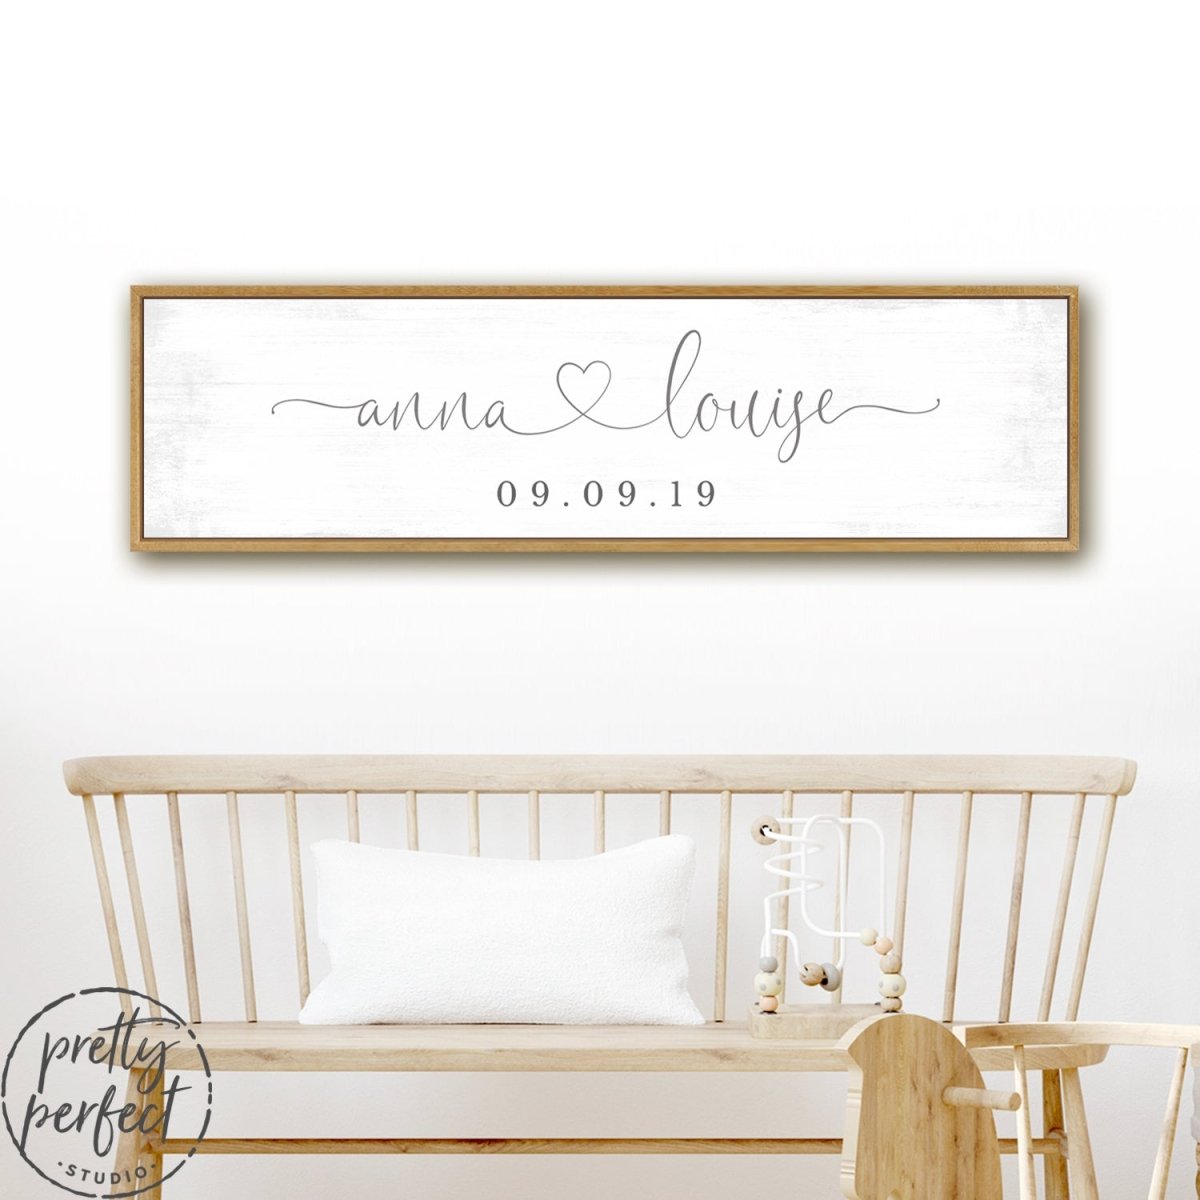 Boy or Girl Personalized Name Sign for the Nursery Room - Pretty Perfect Studio